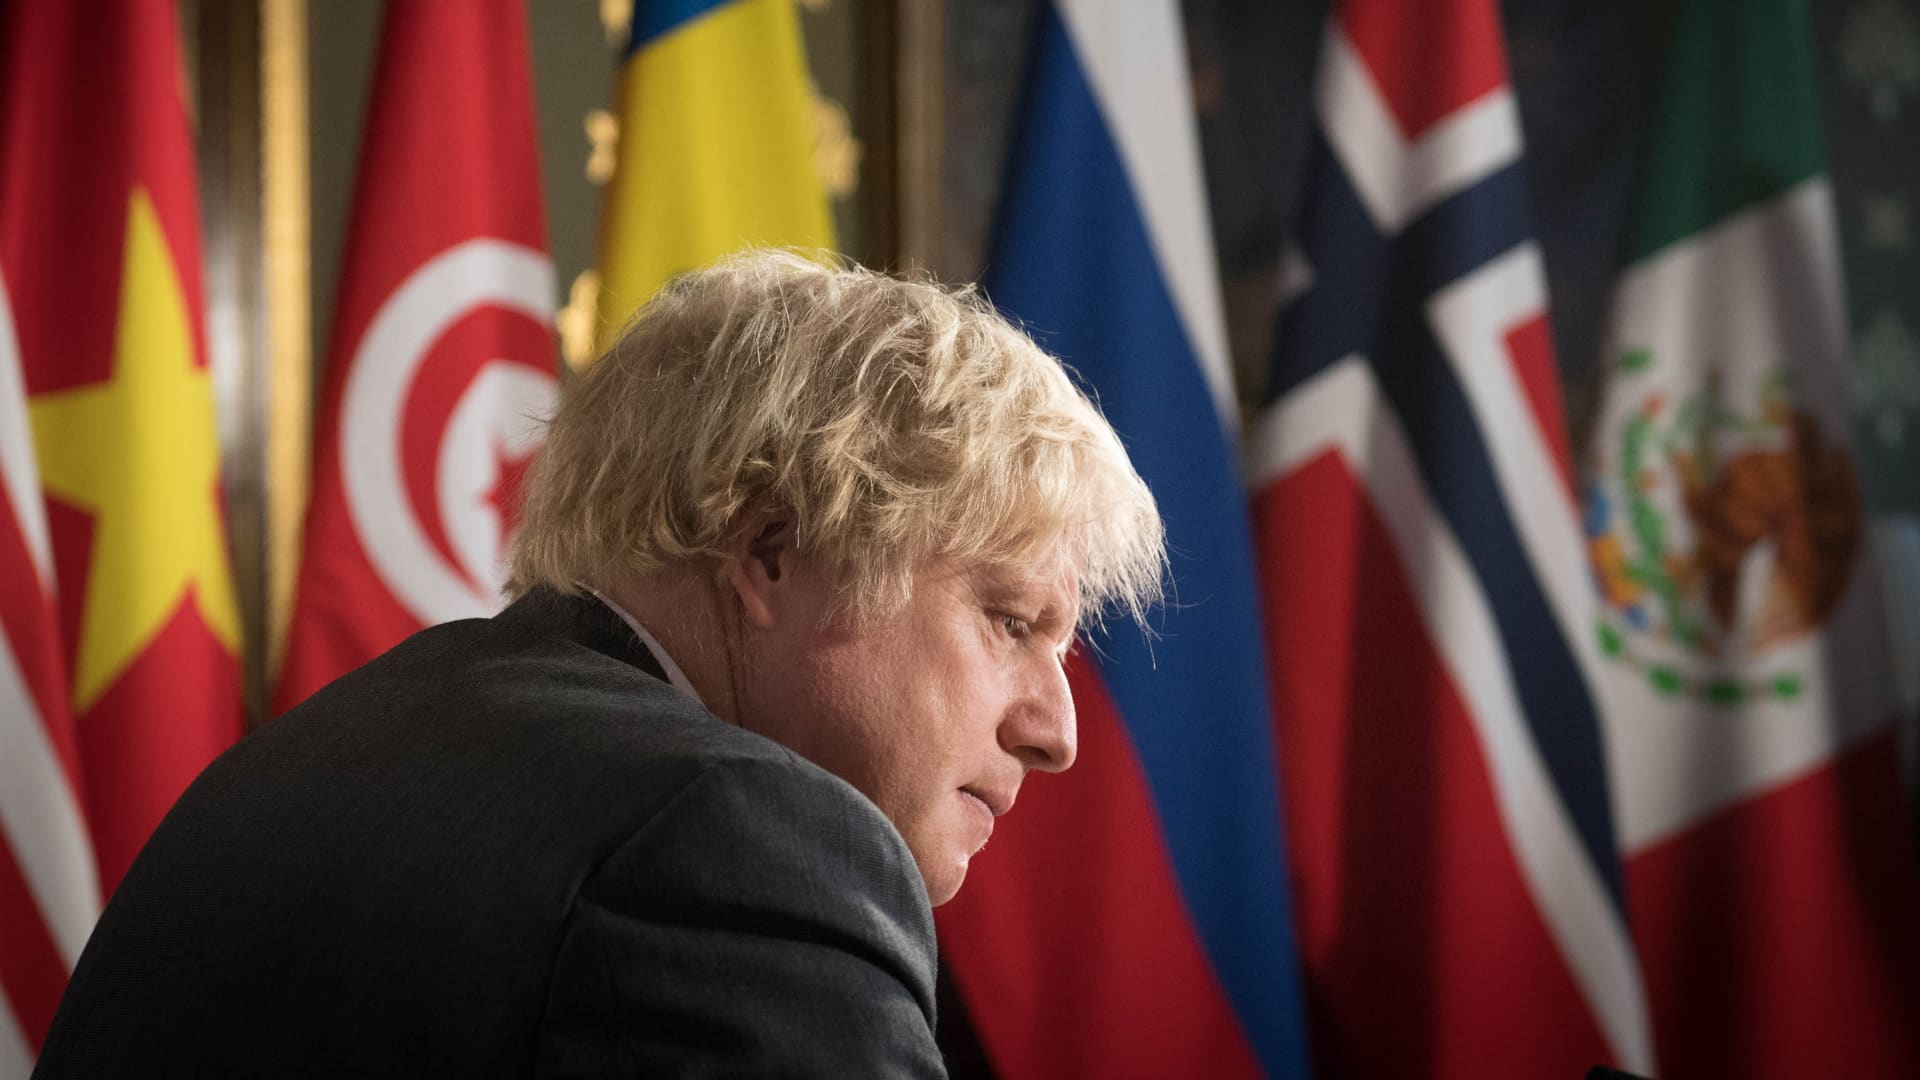 U.K. Prime Minister Boris Johnson chairs a session of the UN Security Council on climate and security at the Foreign, Commonwealth and Development Office on February 23, 2021 in London, England. The U.K. holds the security council's rotating presidency and is the host nation of this year's COP26 UN climate summit in Glasgow.